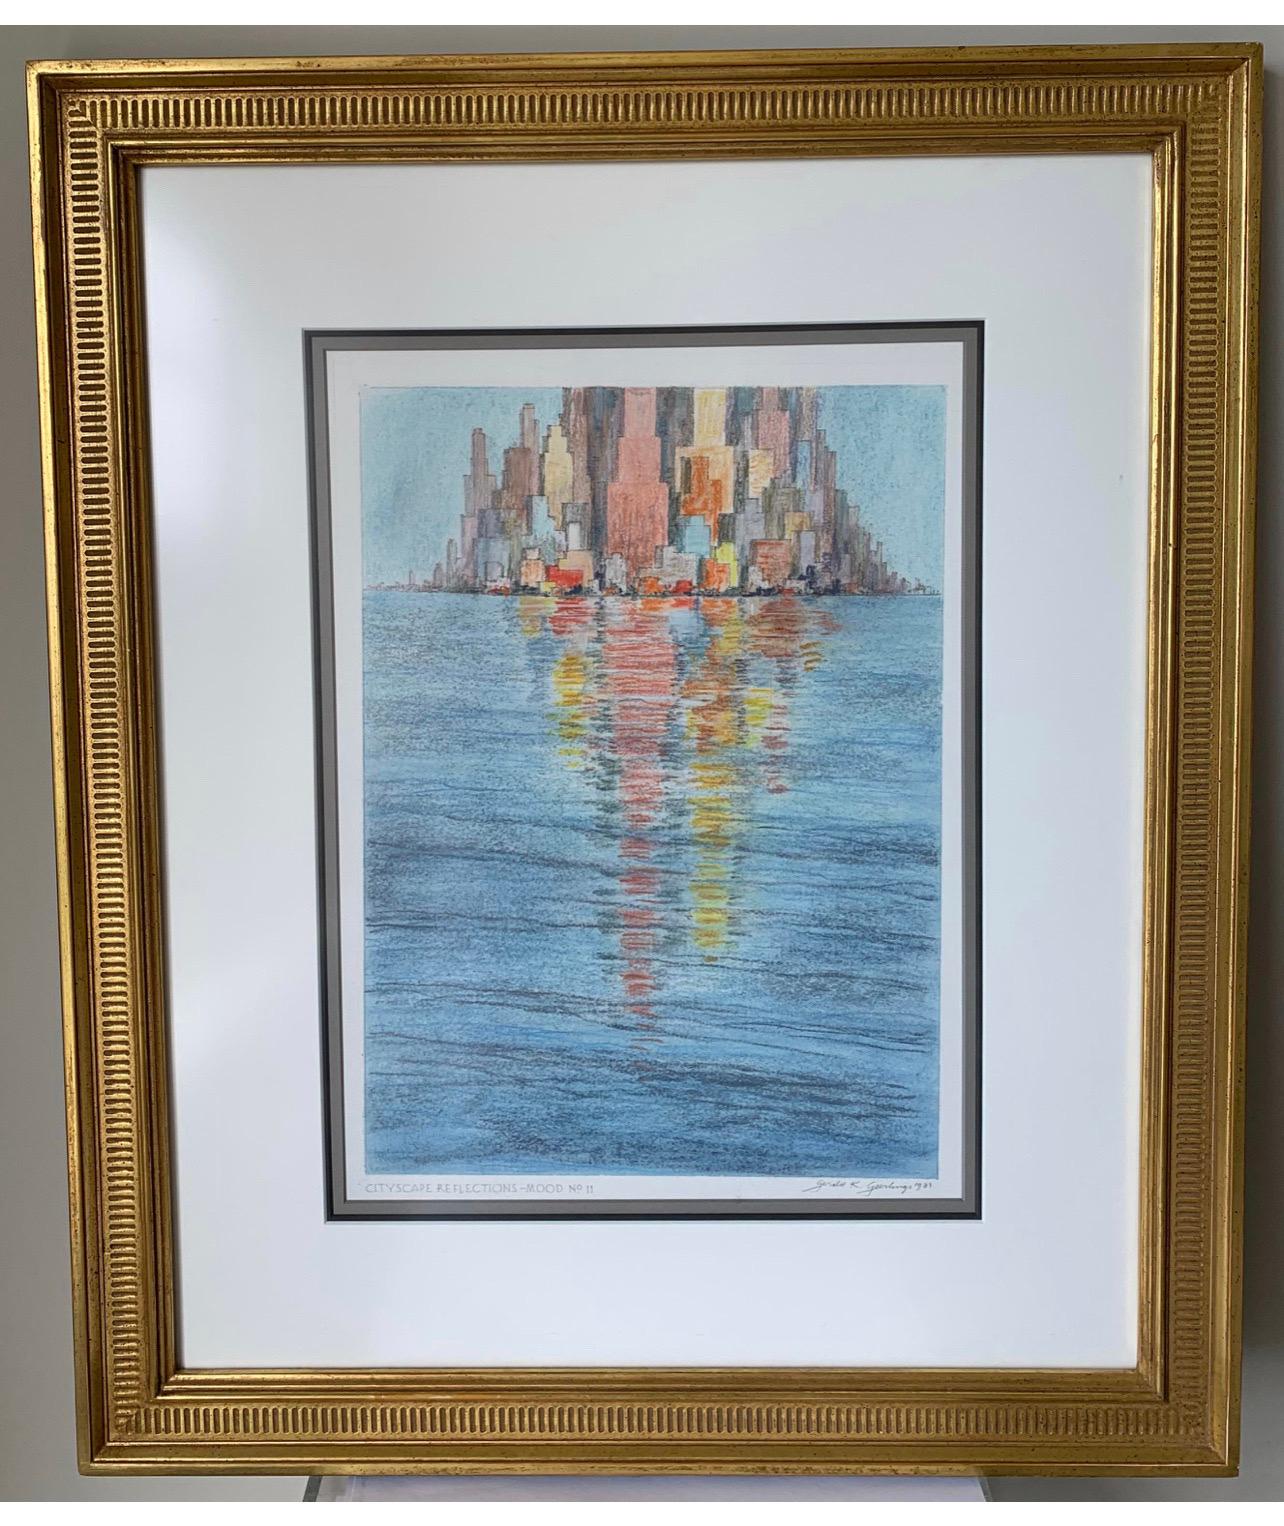 Modern Cityscape Reflections - Mood No. 11, 1983 Gerald K. Geerlings  For Sale